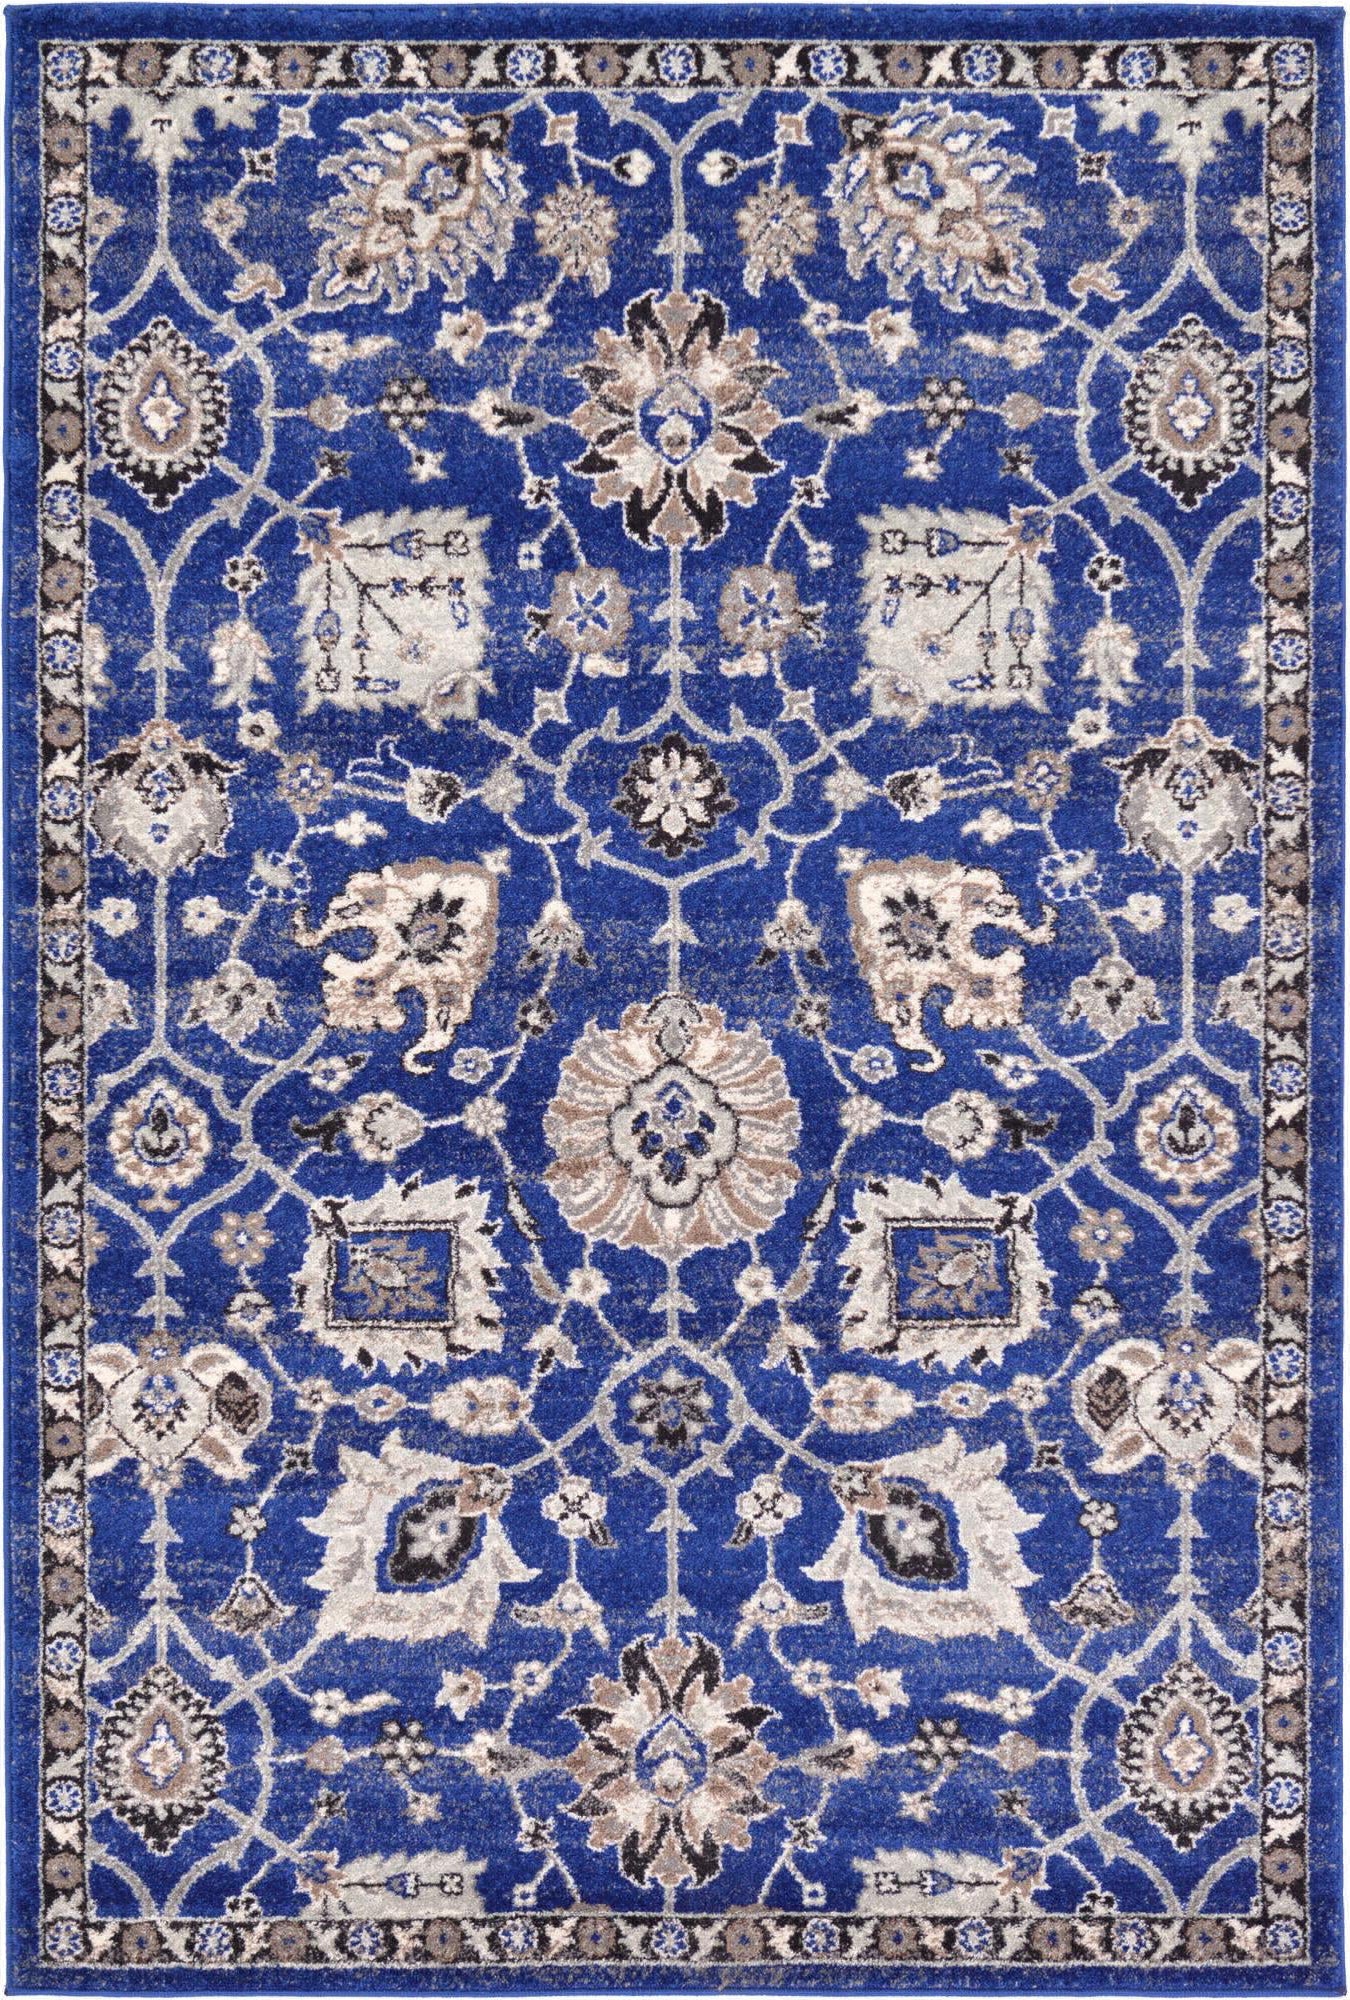 Unique Loom Tradition T-Heritage-5205a Blue Area Rug main image